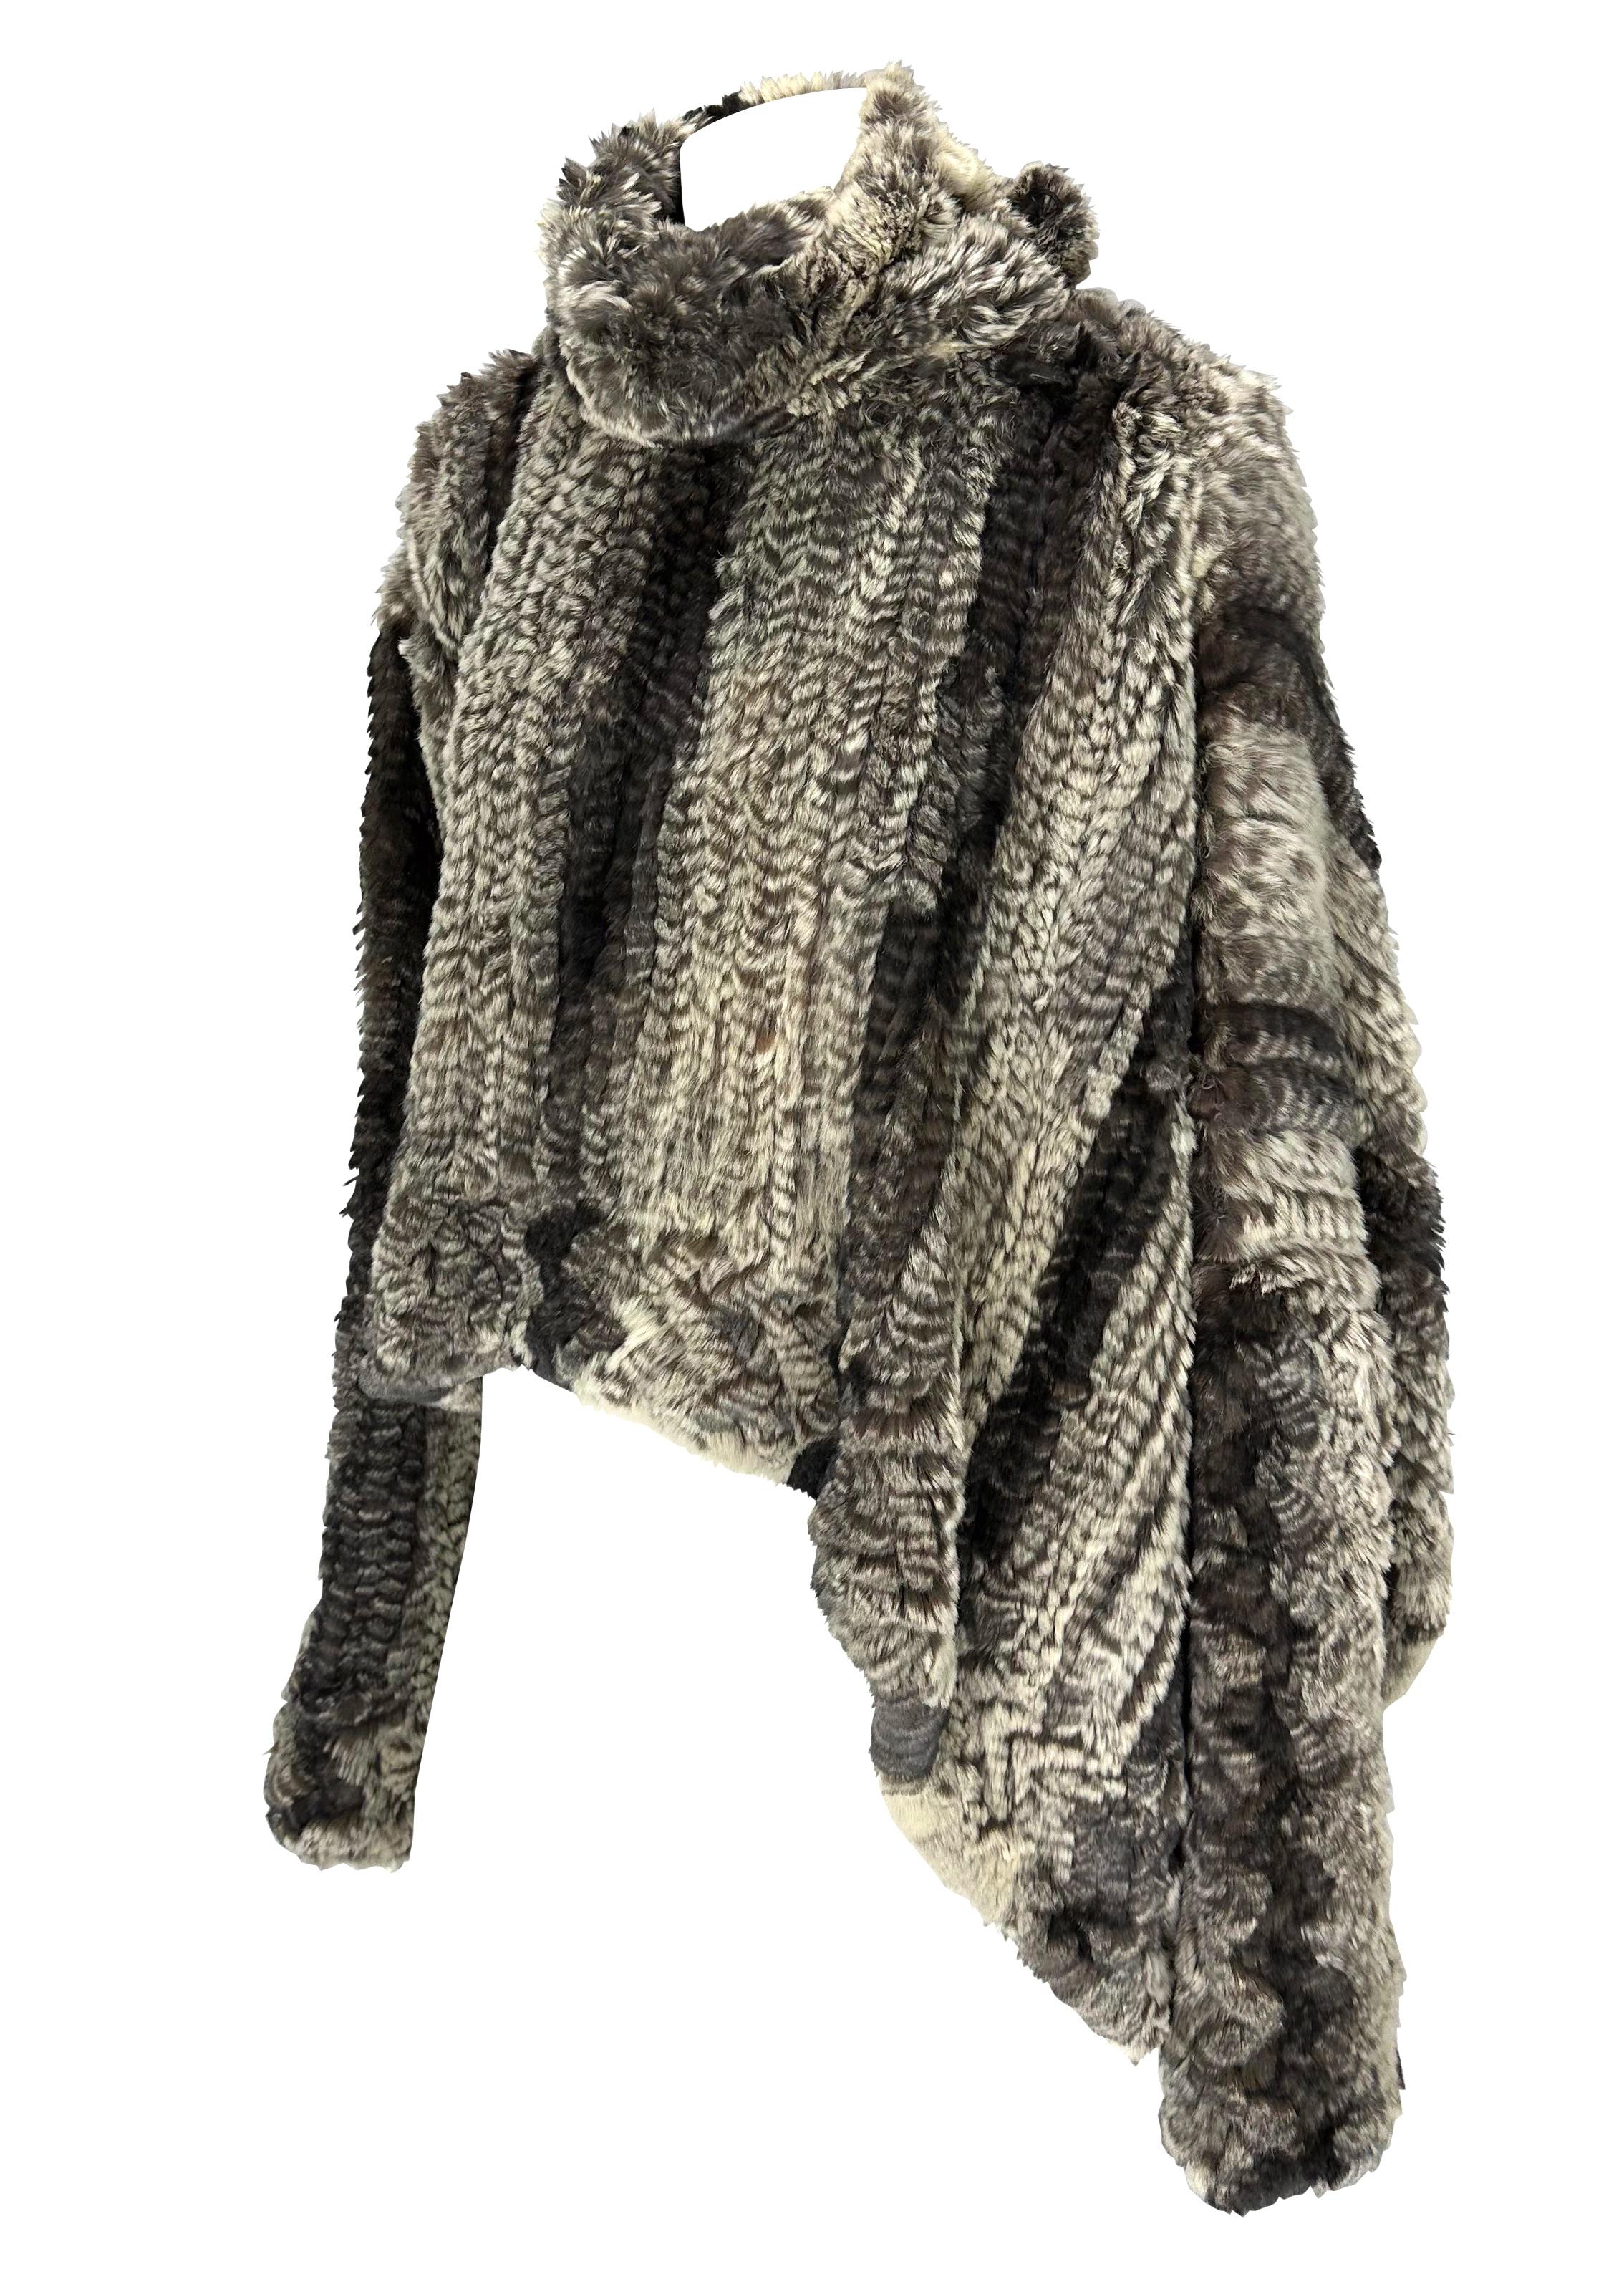 Presenting a fabulous oversized knit lapin John Galliano tunic sweater. From the Fall/Winter 2000 collection, this soft asymmetric top features a turtleneck, button closure at the neck, and slits at the sides. 

Approximate measurements:
Size -